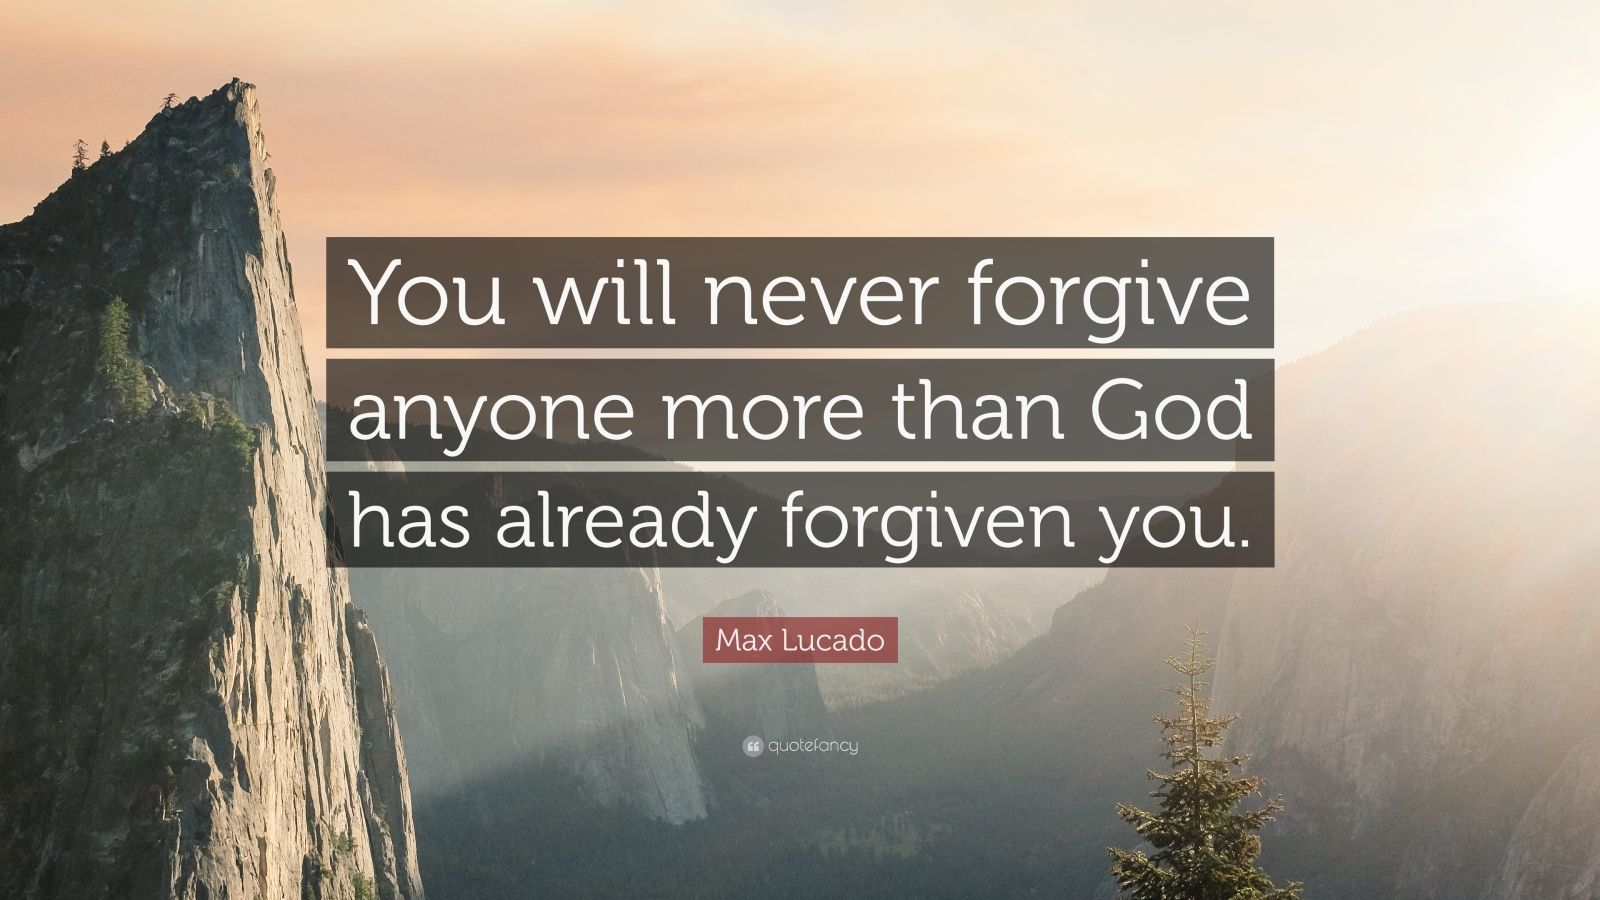 Max Lucado Quote: “You will never forgive anyone more than God has ...